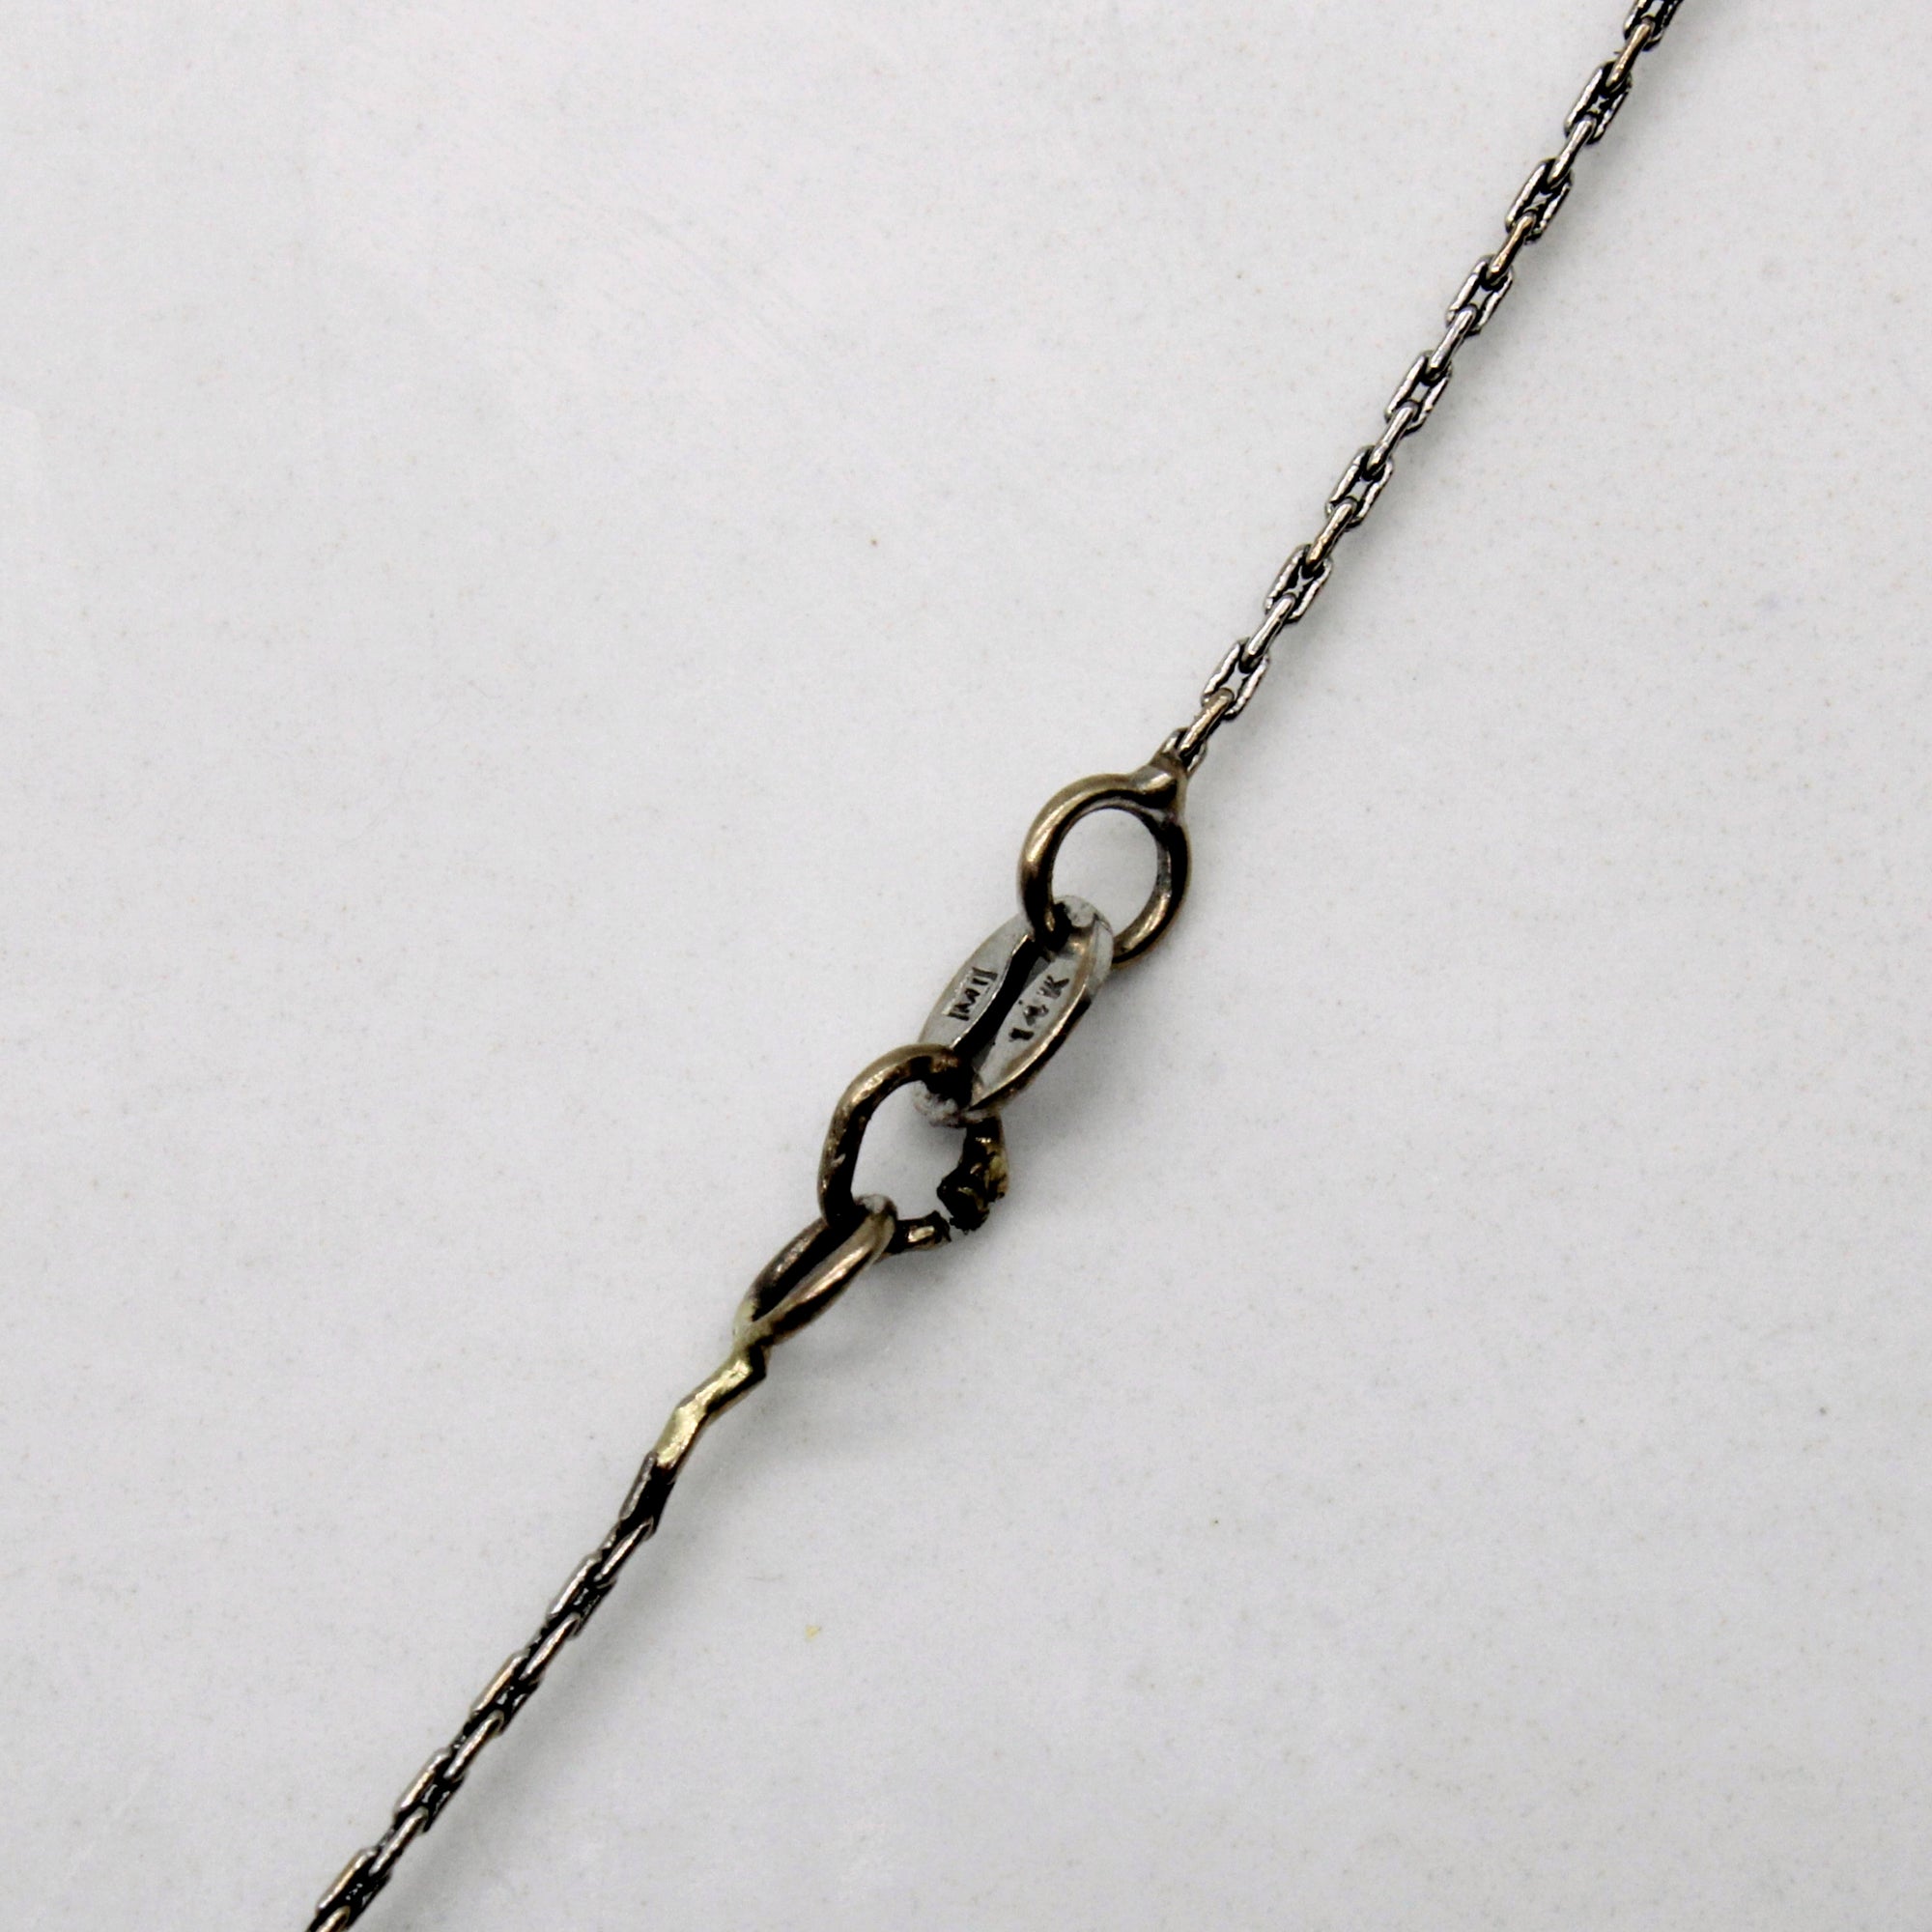 14k White Gold Bead Chain Necklace | 26